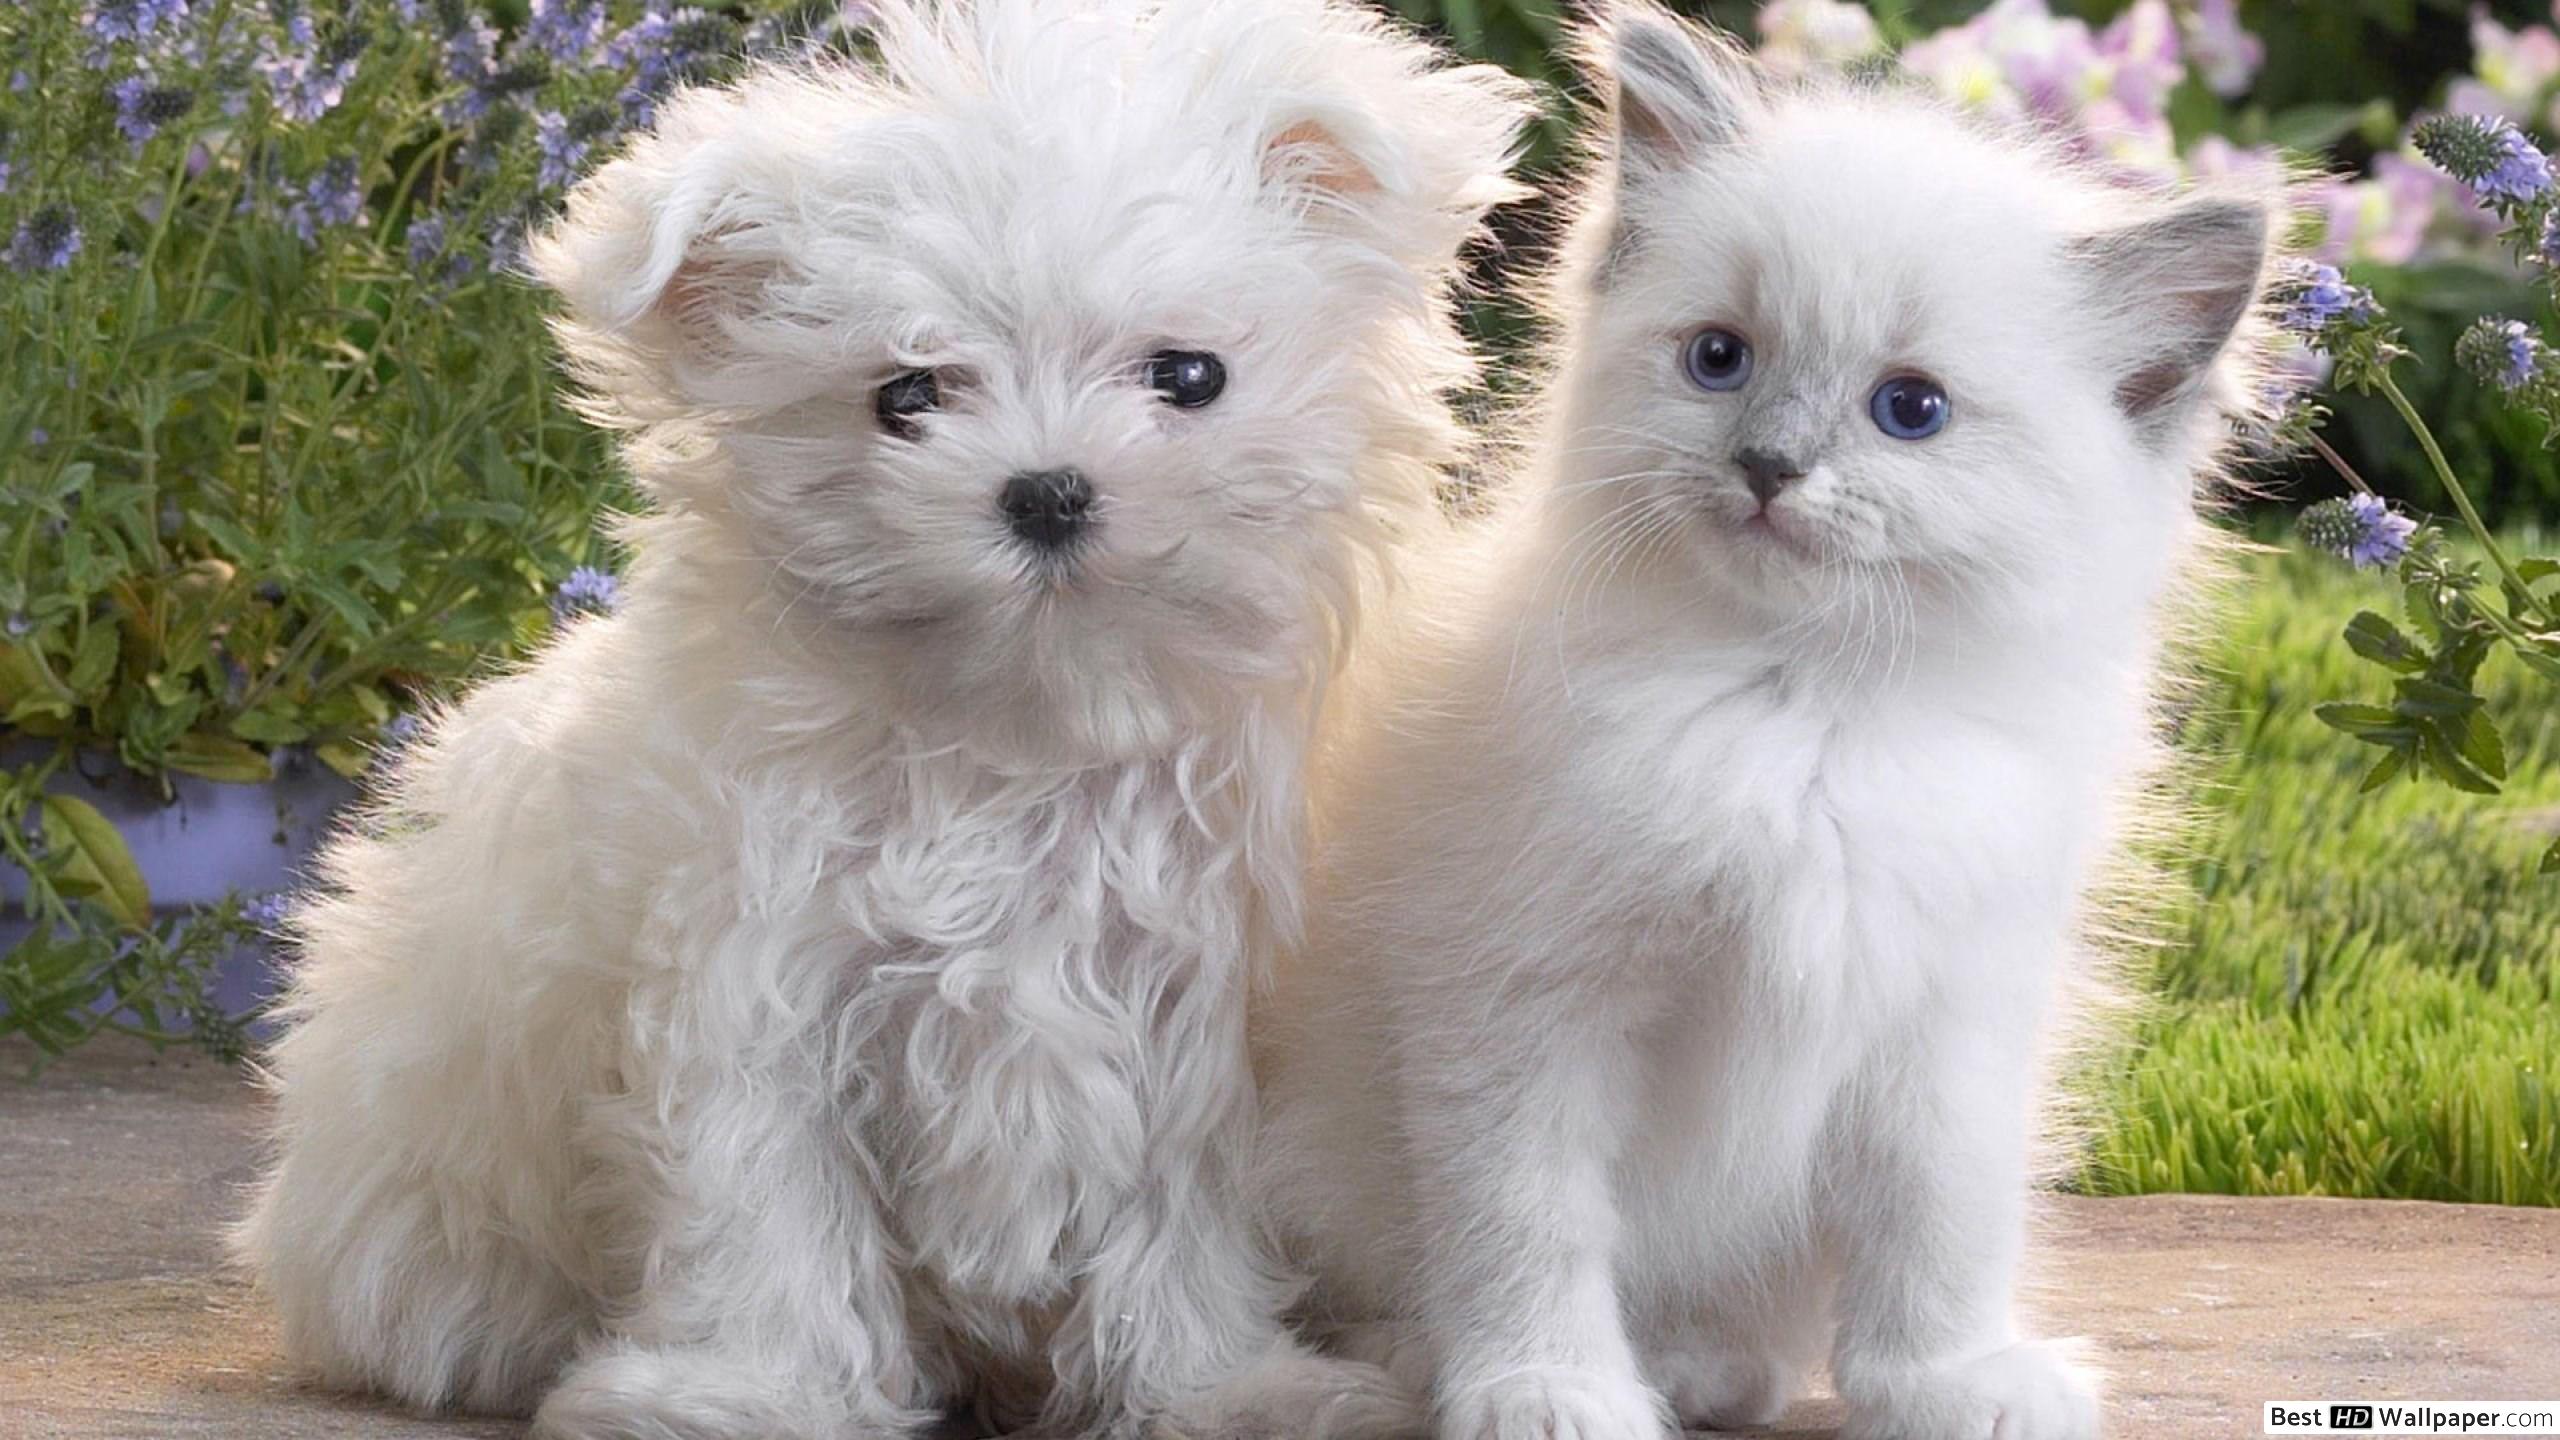 White Puppy and Kitten HD wallpaper download